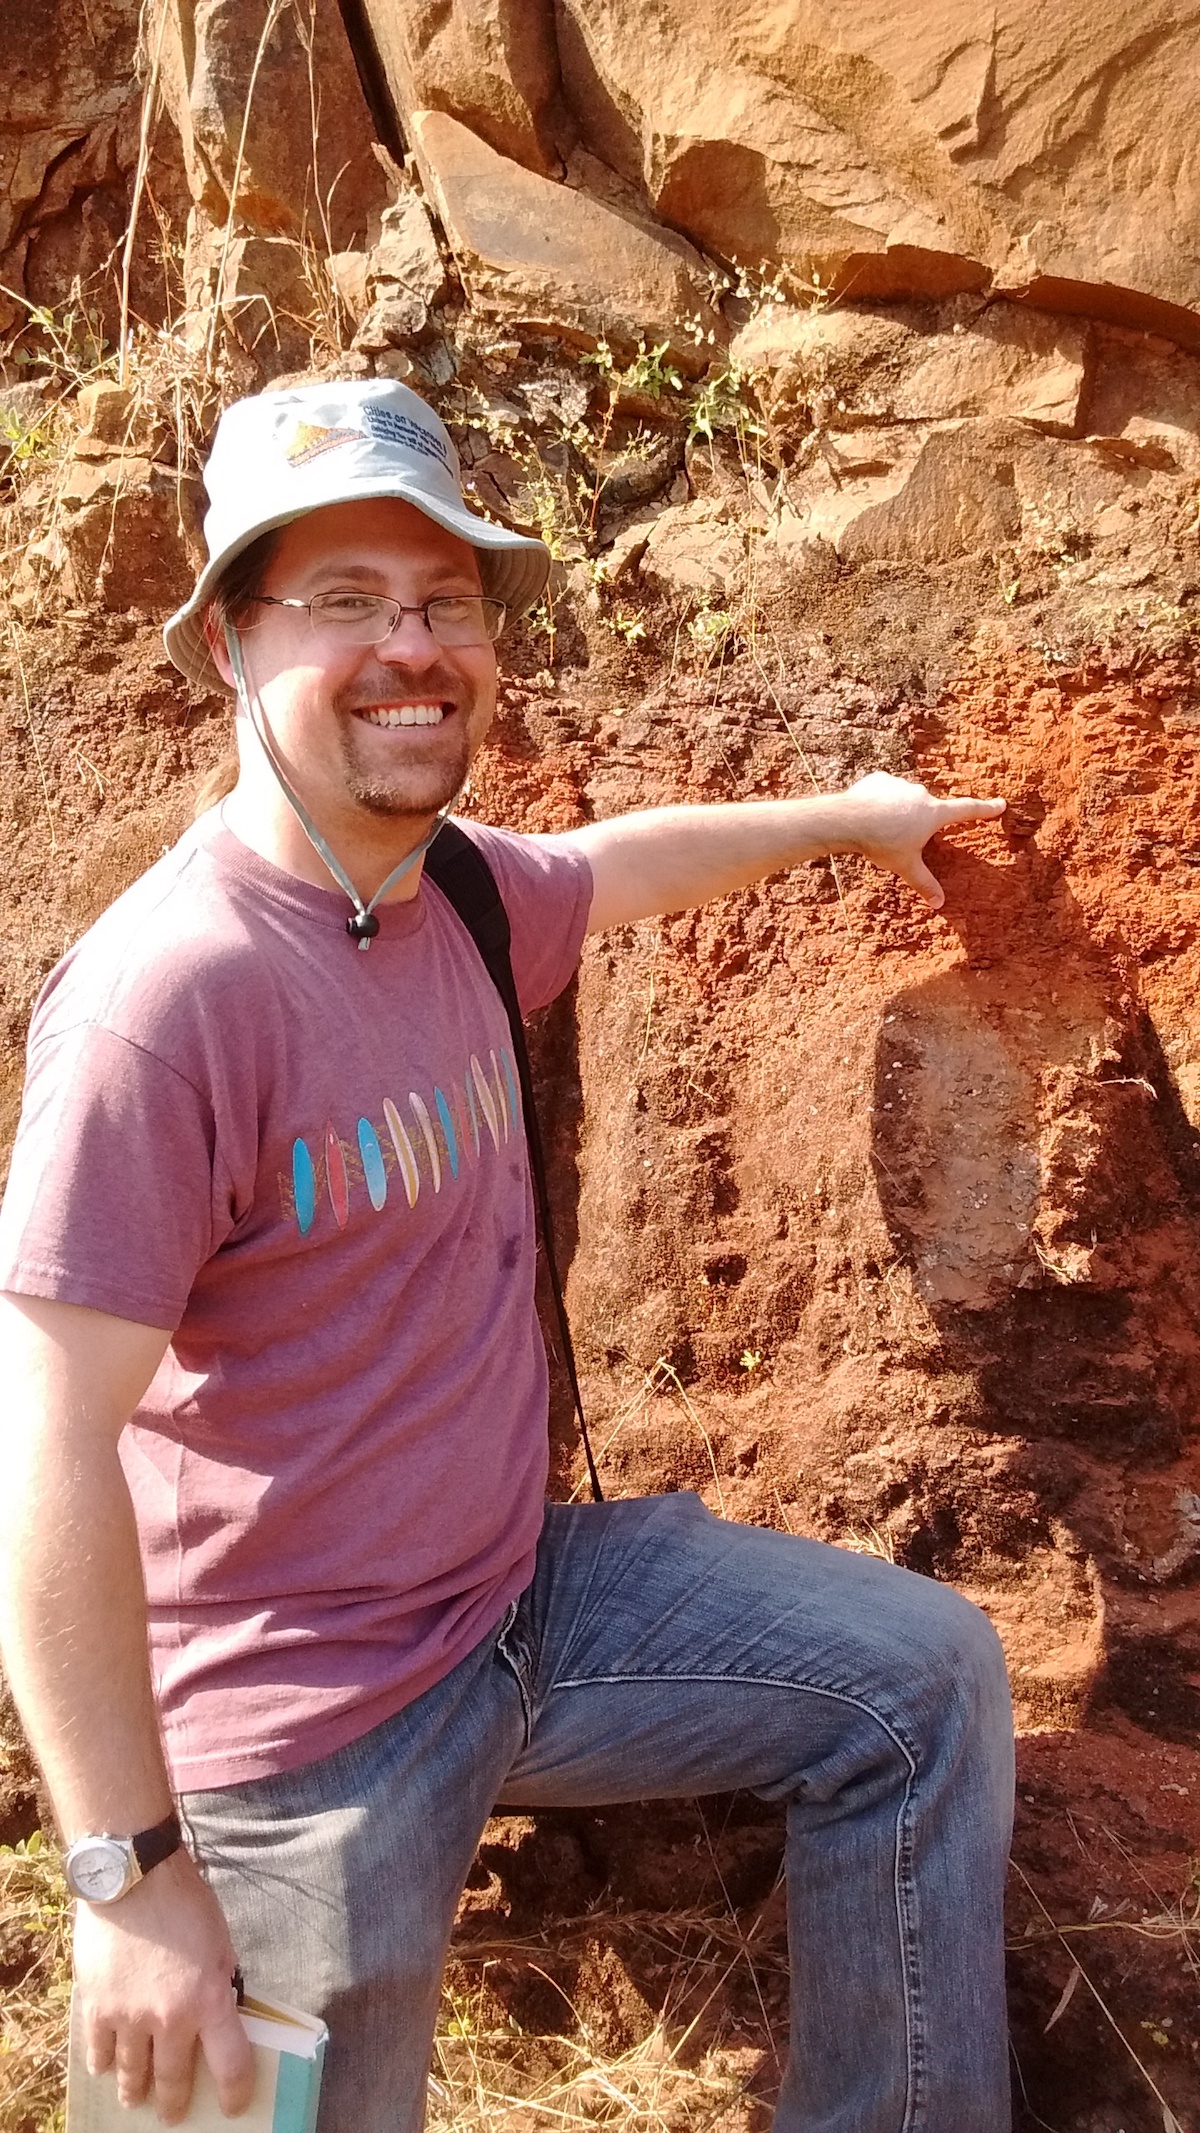 Vanderkluysen points at a red bole that marks the Bushe-Poladpur contact/Cretaceous-Paleogene boundary near the town of Poladpur in the Western Ghats. Image credit, Courtney Sprain.